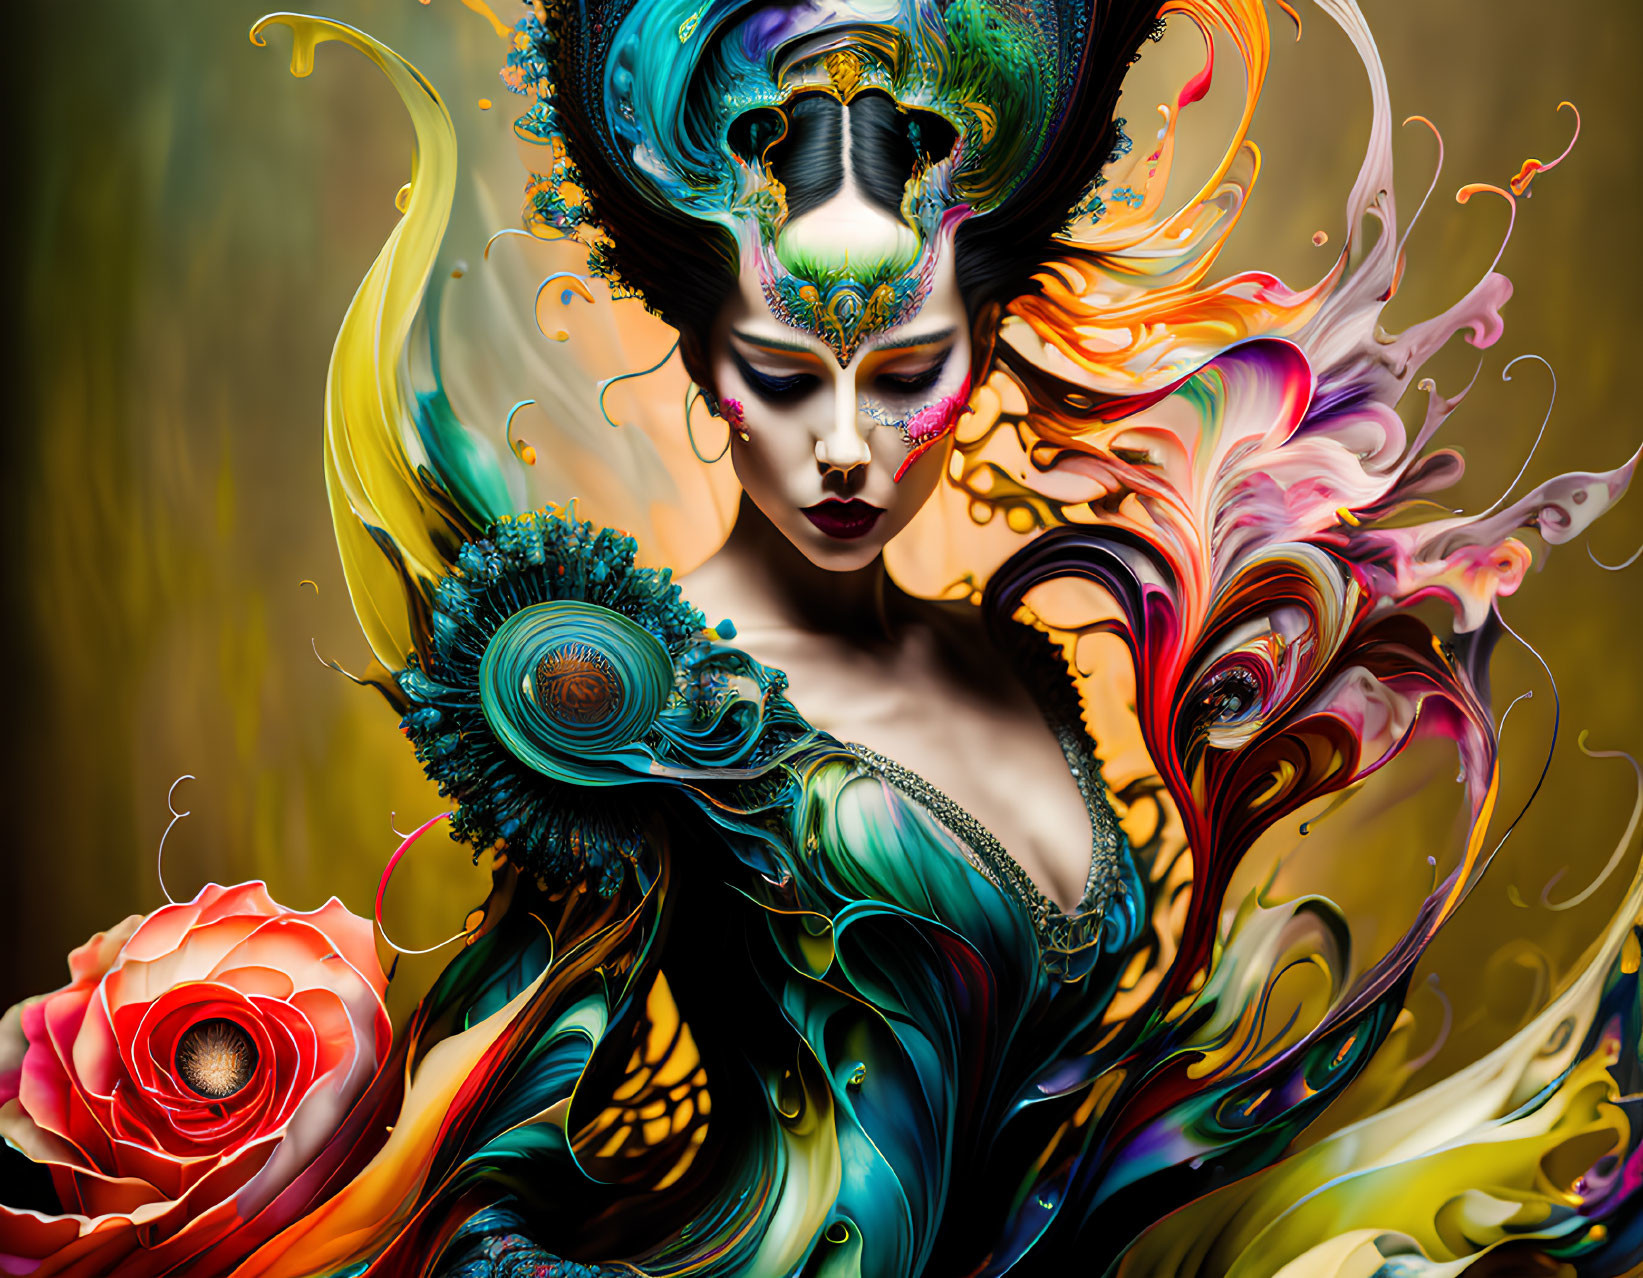 Colorful digital artwork of woman with swirling designs and peacock feathers.